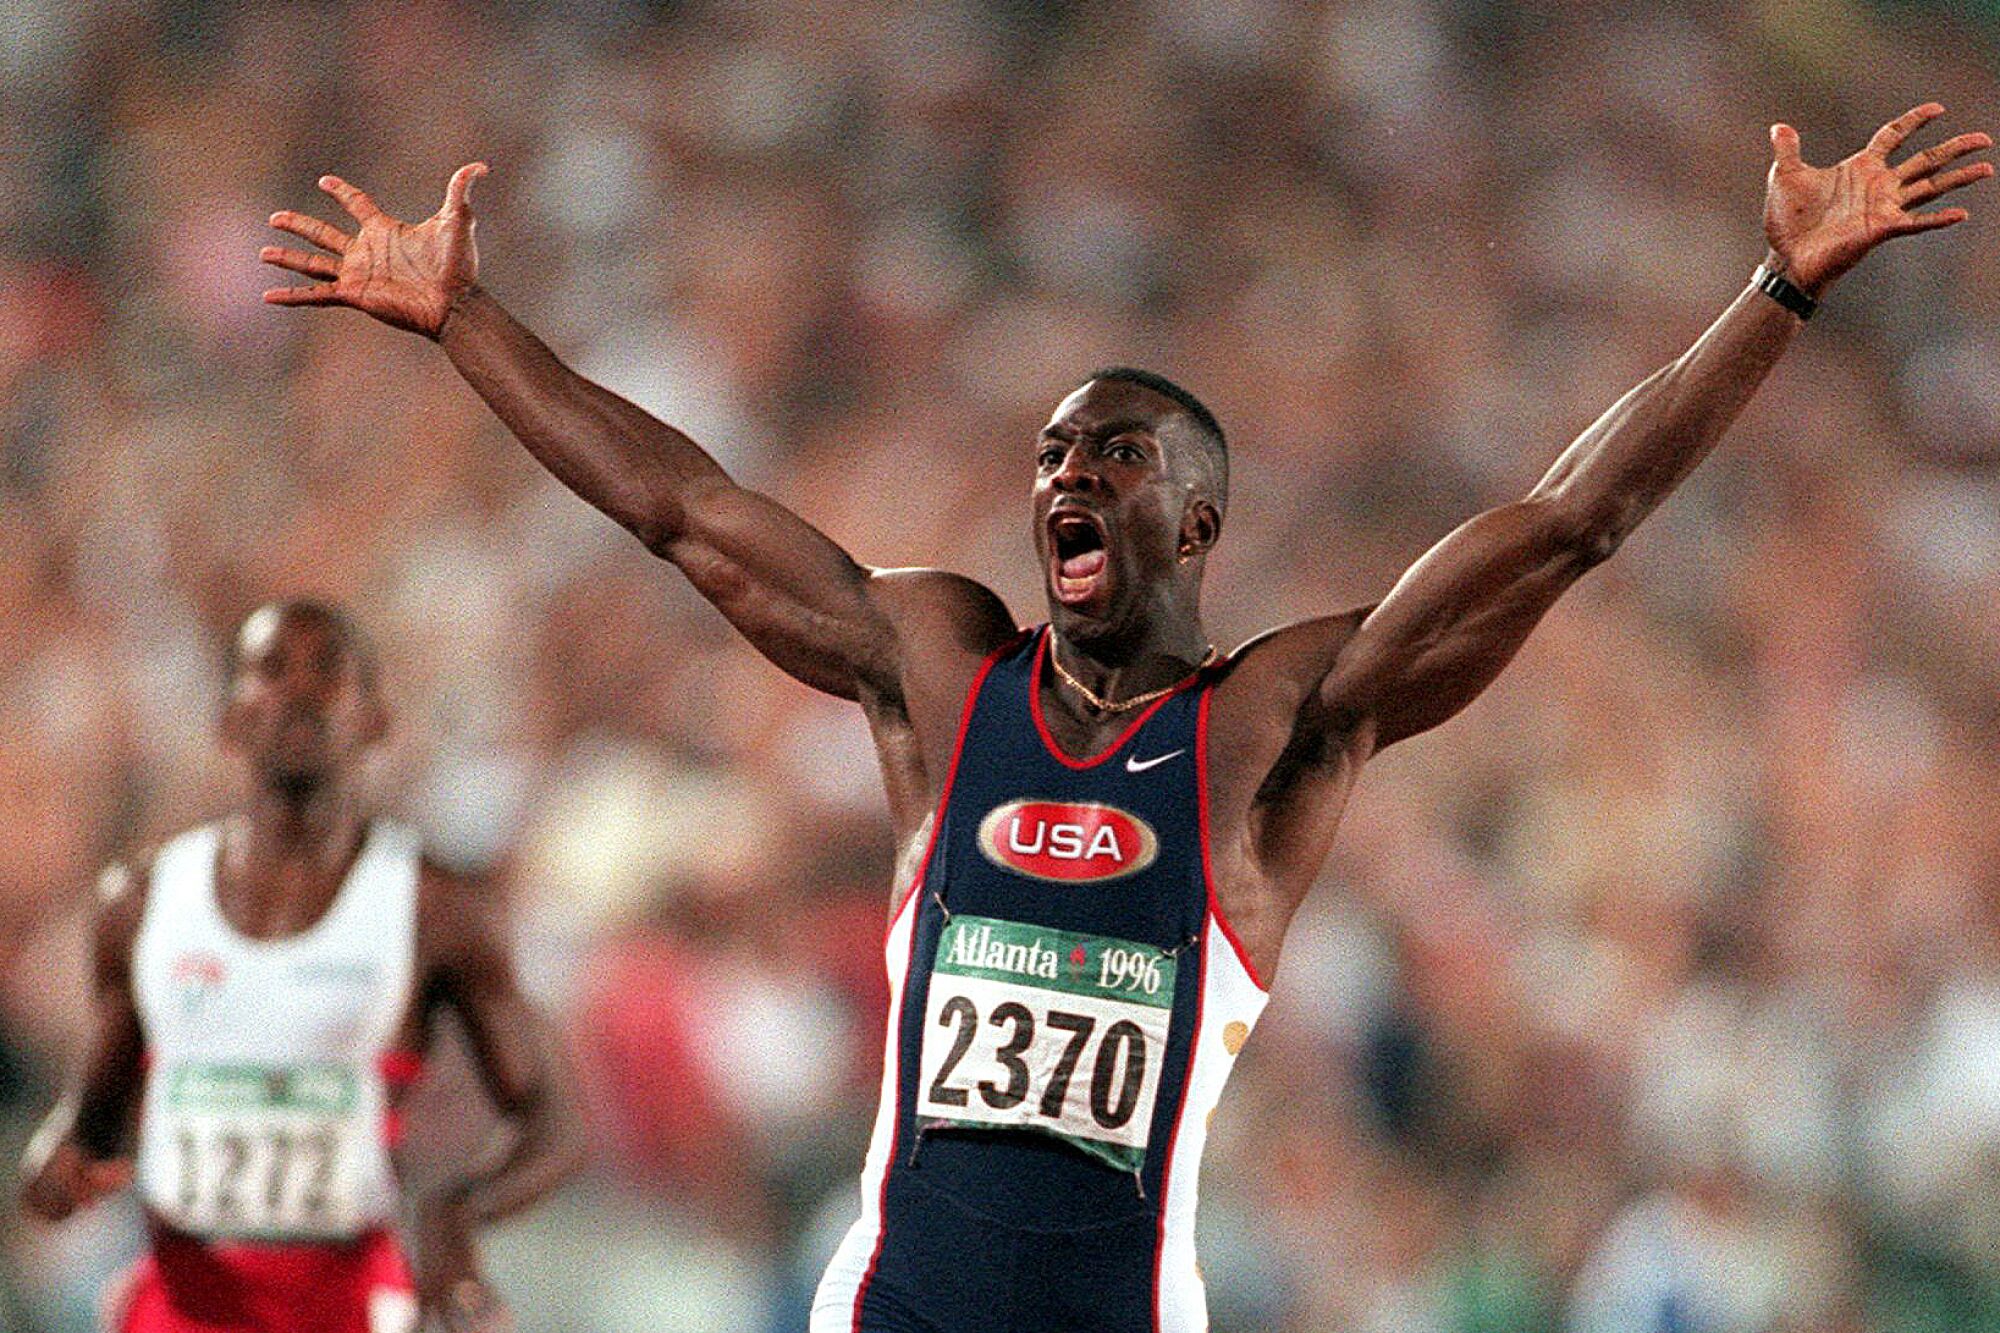 Michael Johnson celebrates after he won the men's 200 meter final in 1996.